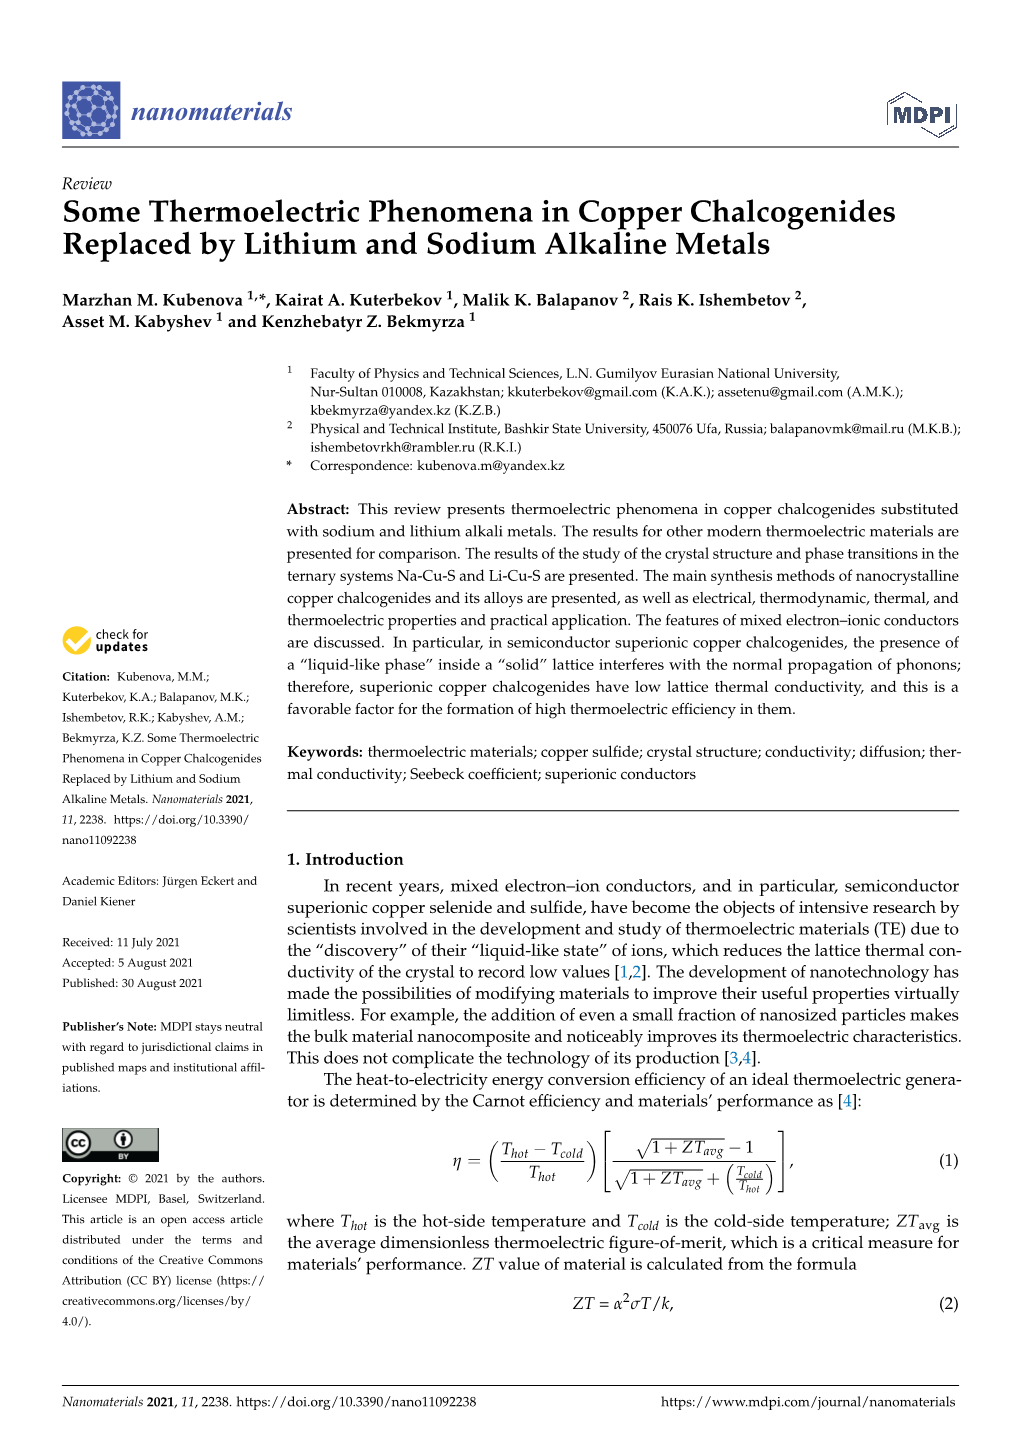 Some Thermoelectric Phenomena in Copper Chalcogenides Replaced by Lithium and Sodium Alkaline Metals